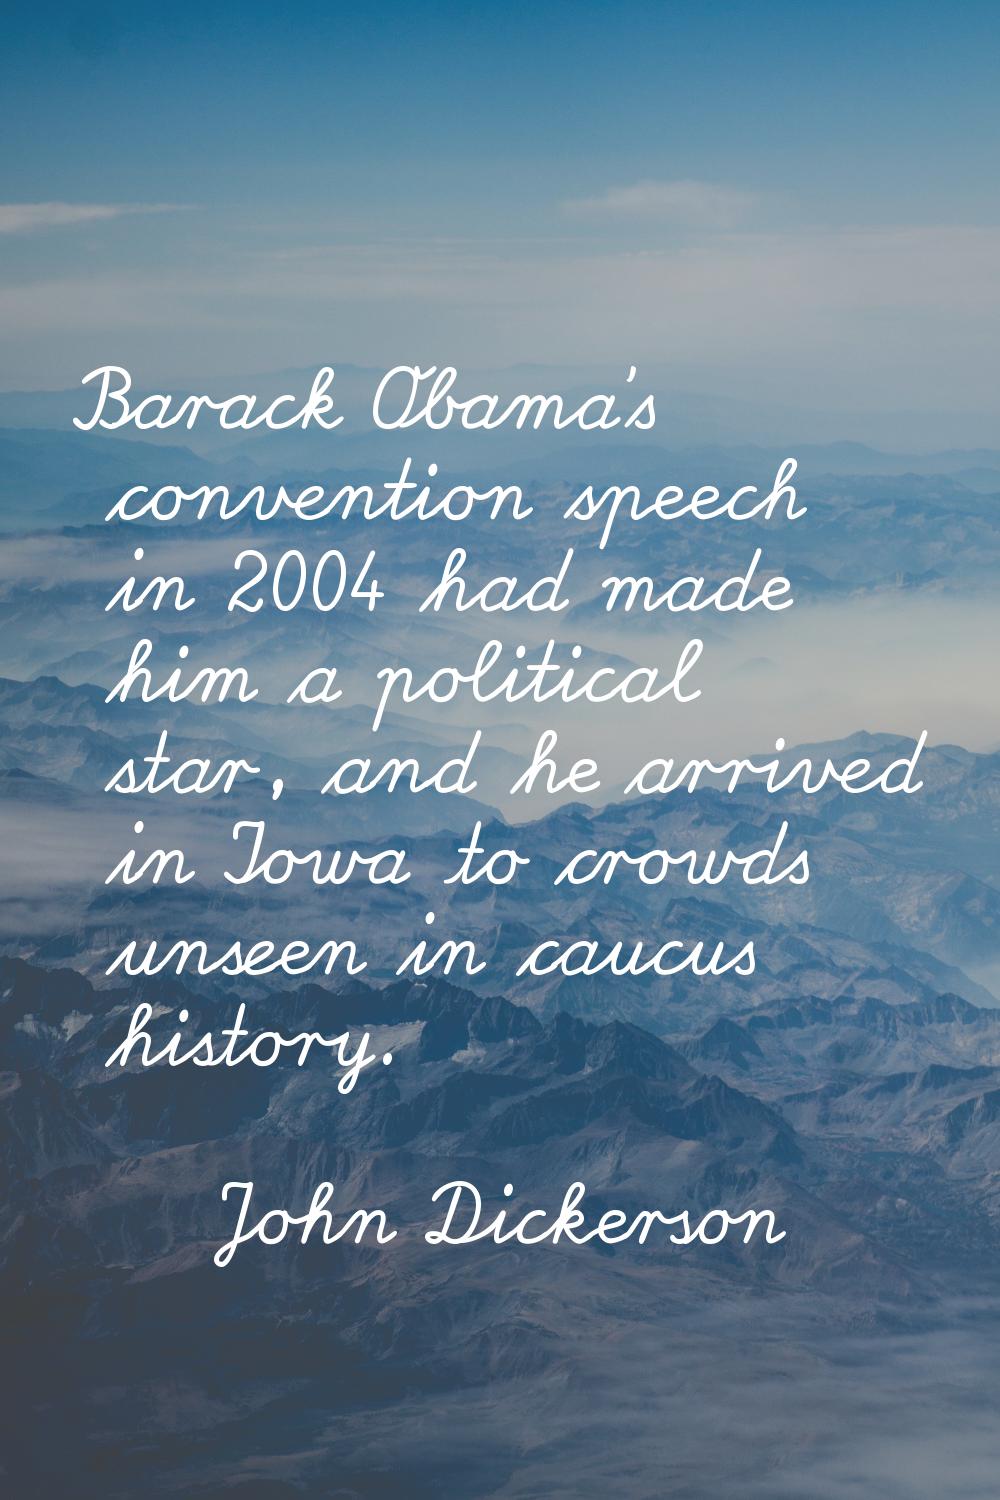 Barack Obama's convention speech in 2004 had made him a political star, and he arrived in Iowa to c